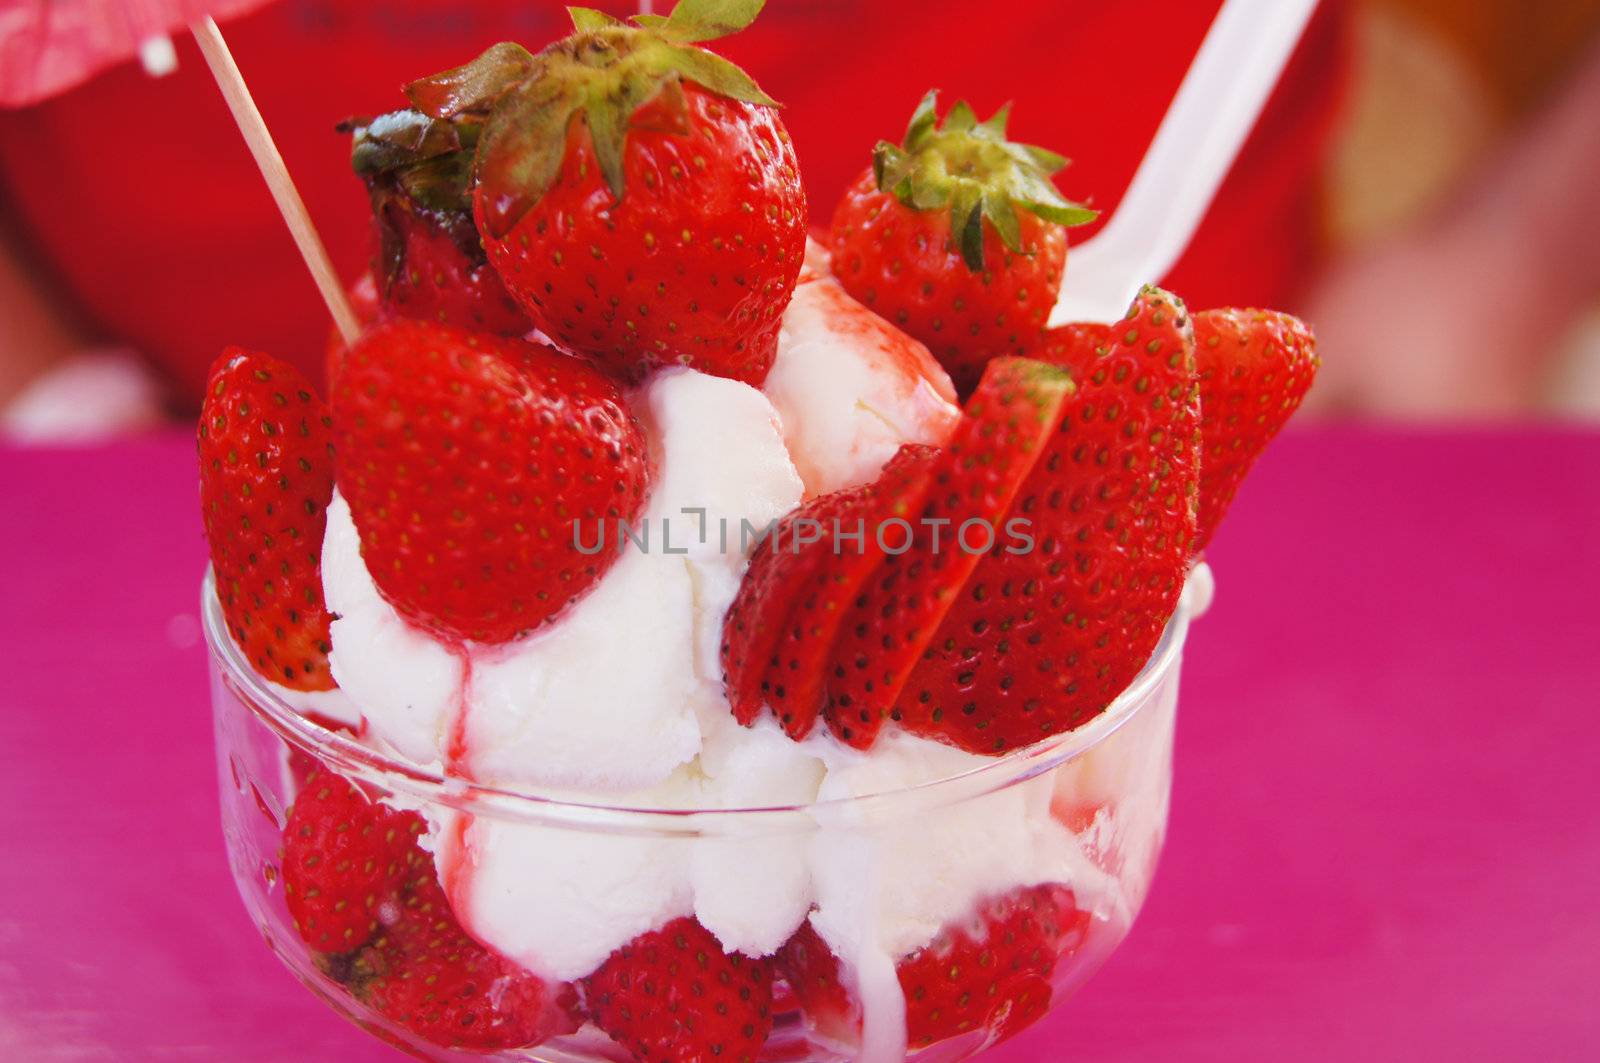 Strawberries and ice cream by Elet